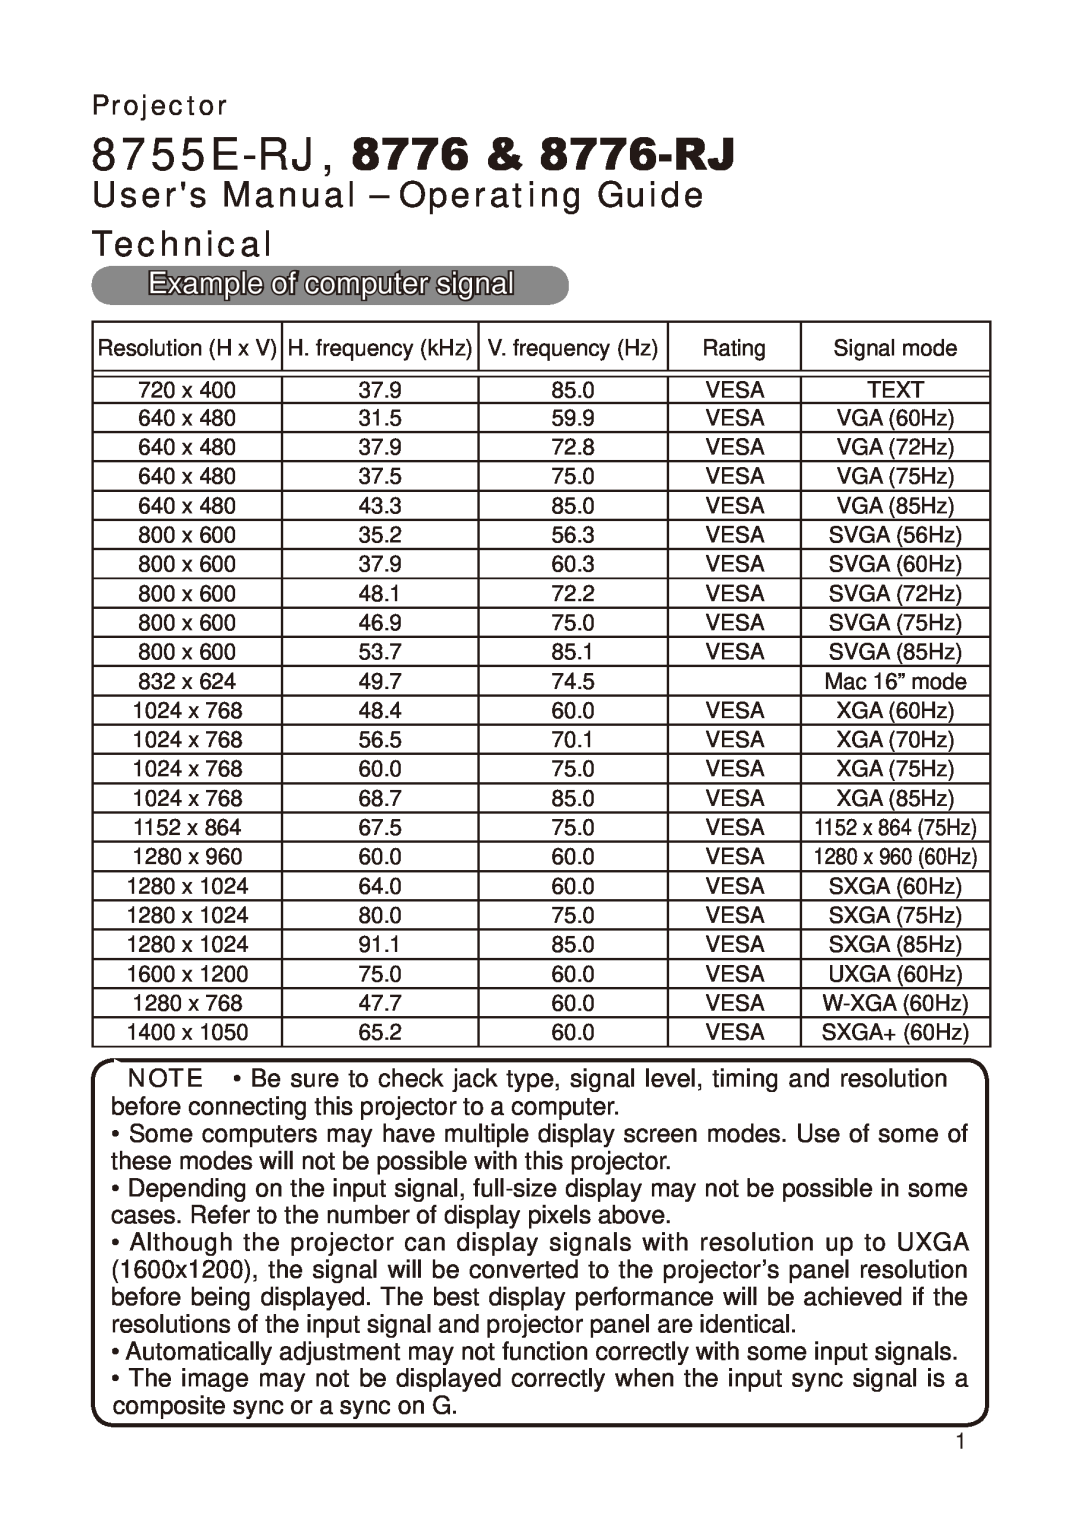 Dukane 8755E-RJ, 8776 & 8776-RJ, Users Manual - Operating Guide Technical, Example of computer signal, Projector 